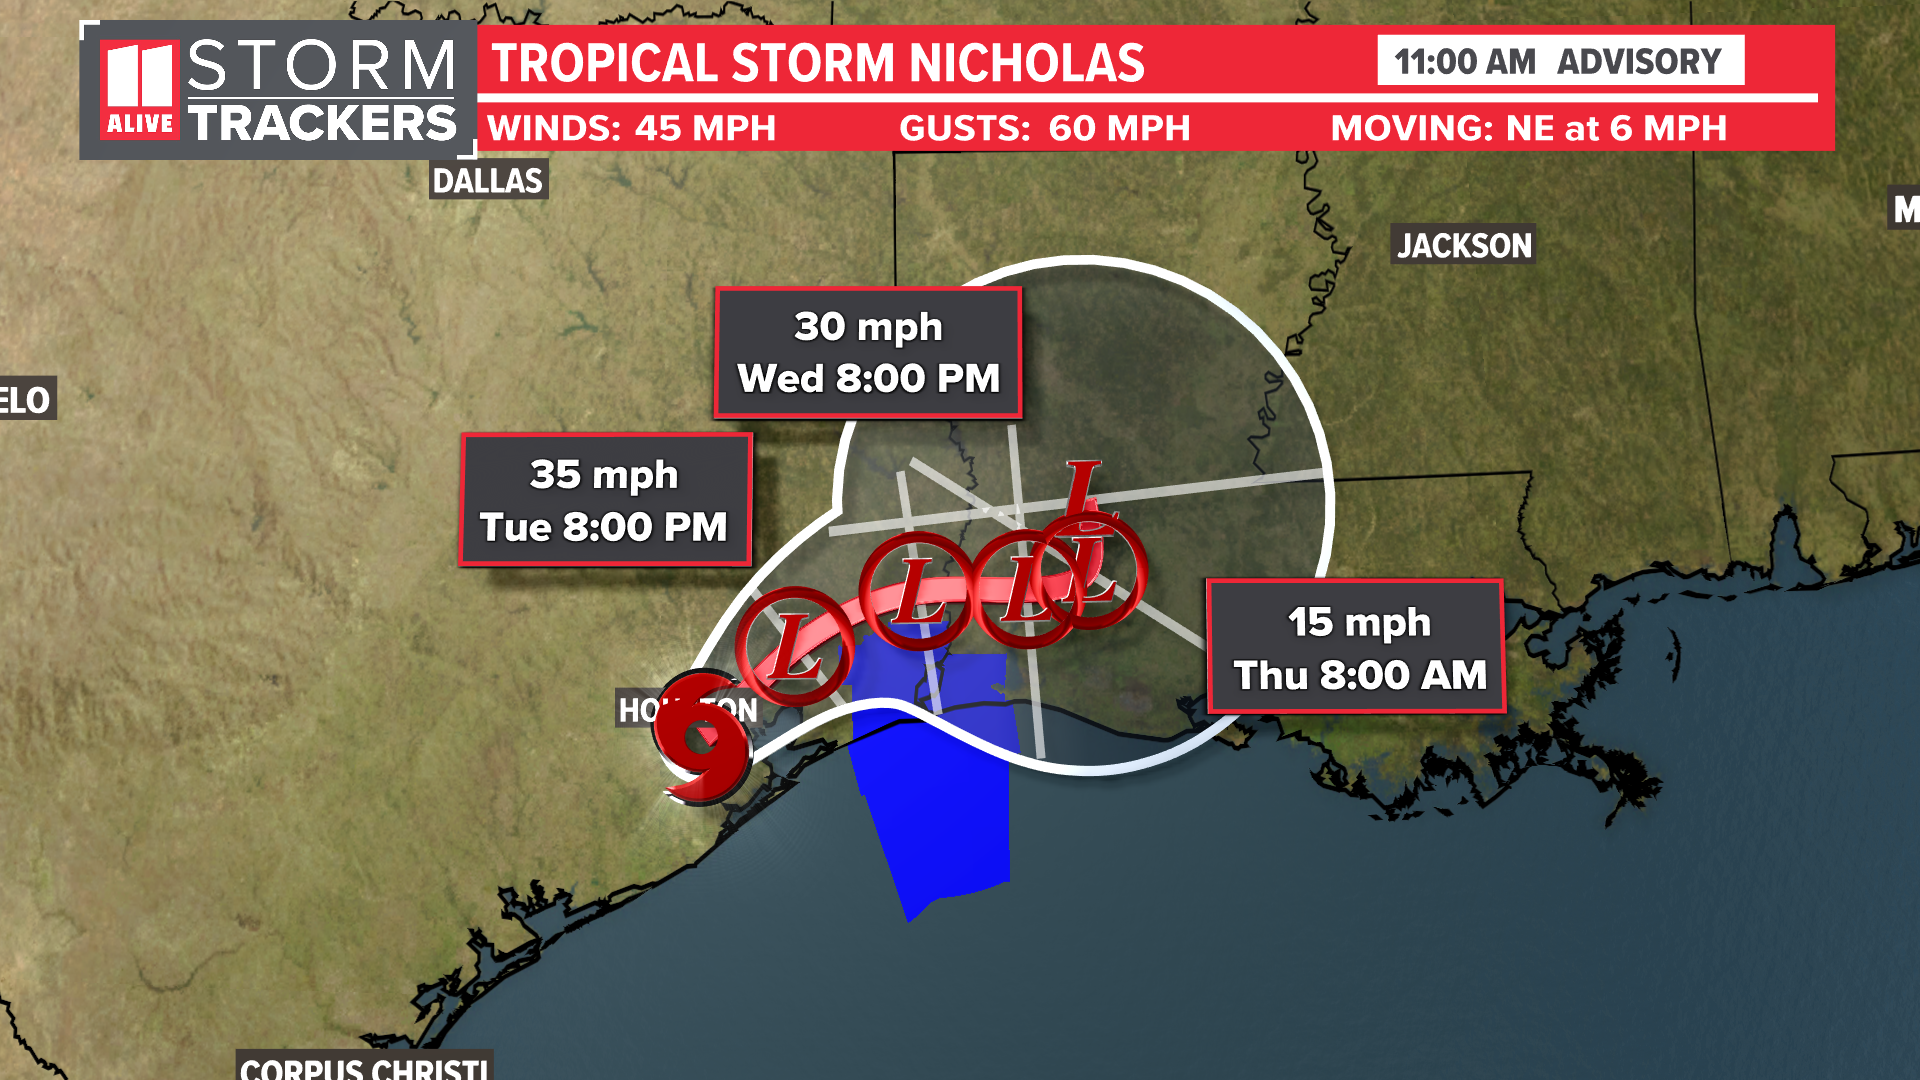 Nicholas remains a tropical storm bringing immense amounts of rain to Louisiana and southeastern Texas